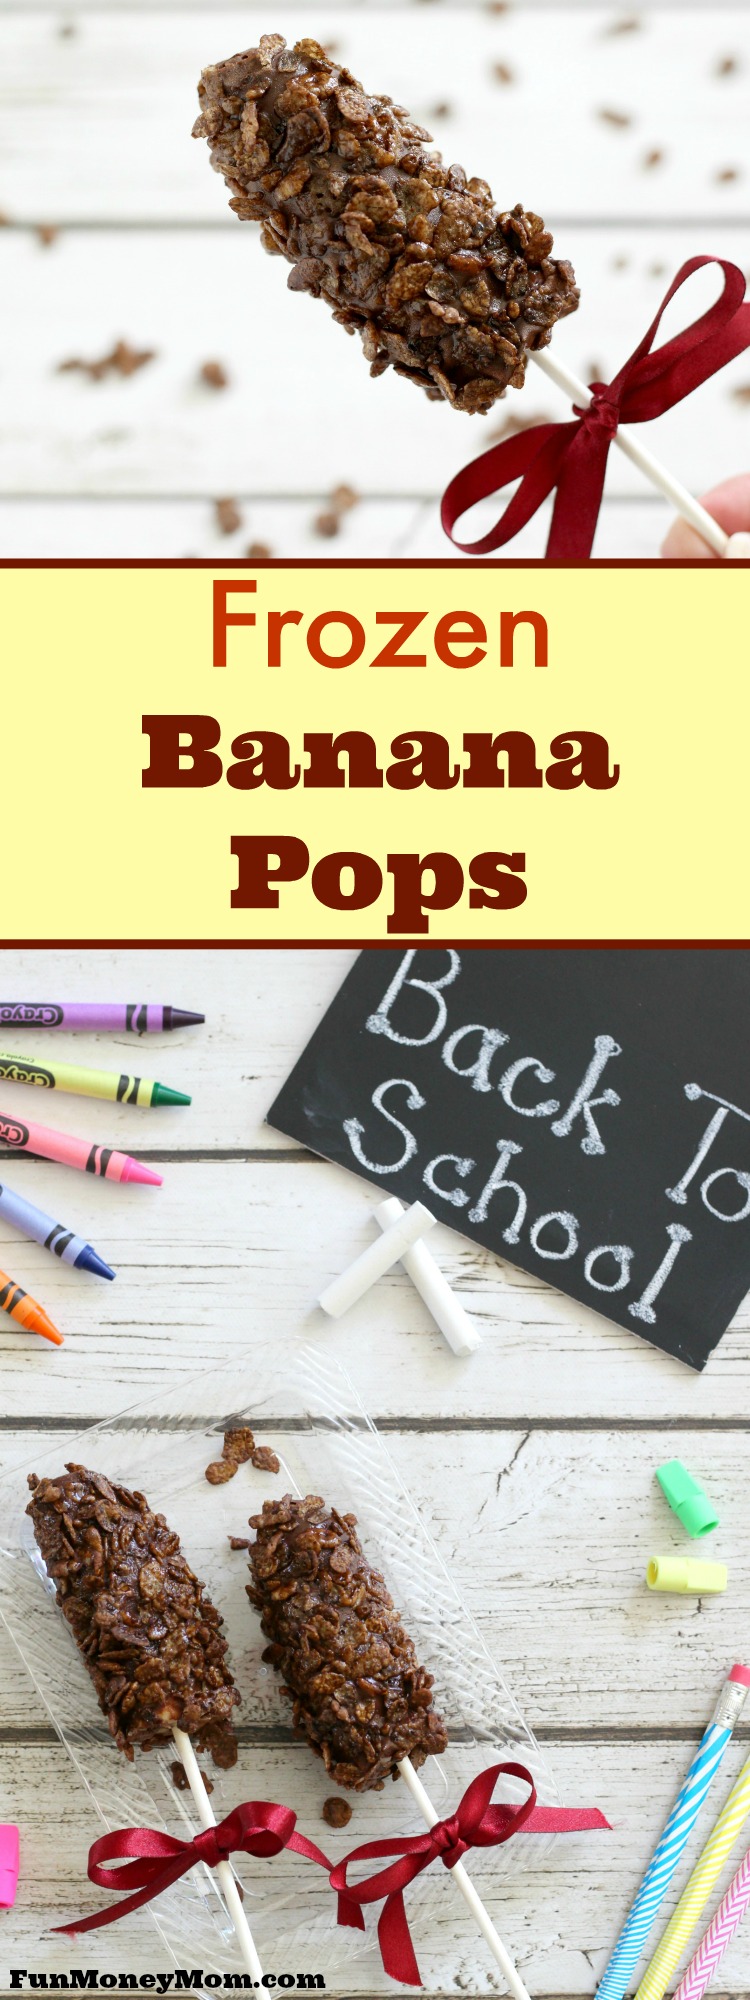 Need a simple after school snack that you know the kids will love? With just three ingredients, these Frozen Banana Pops are the perfect treat for hungry kids and the perfect easy snack recipe for busy moms! #ad